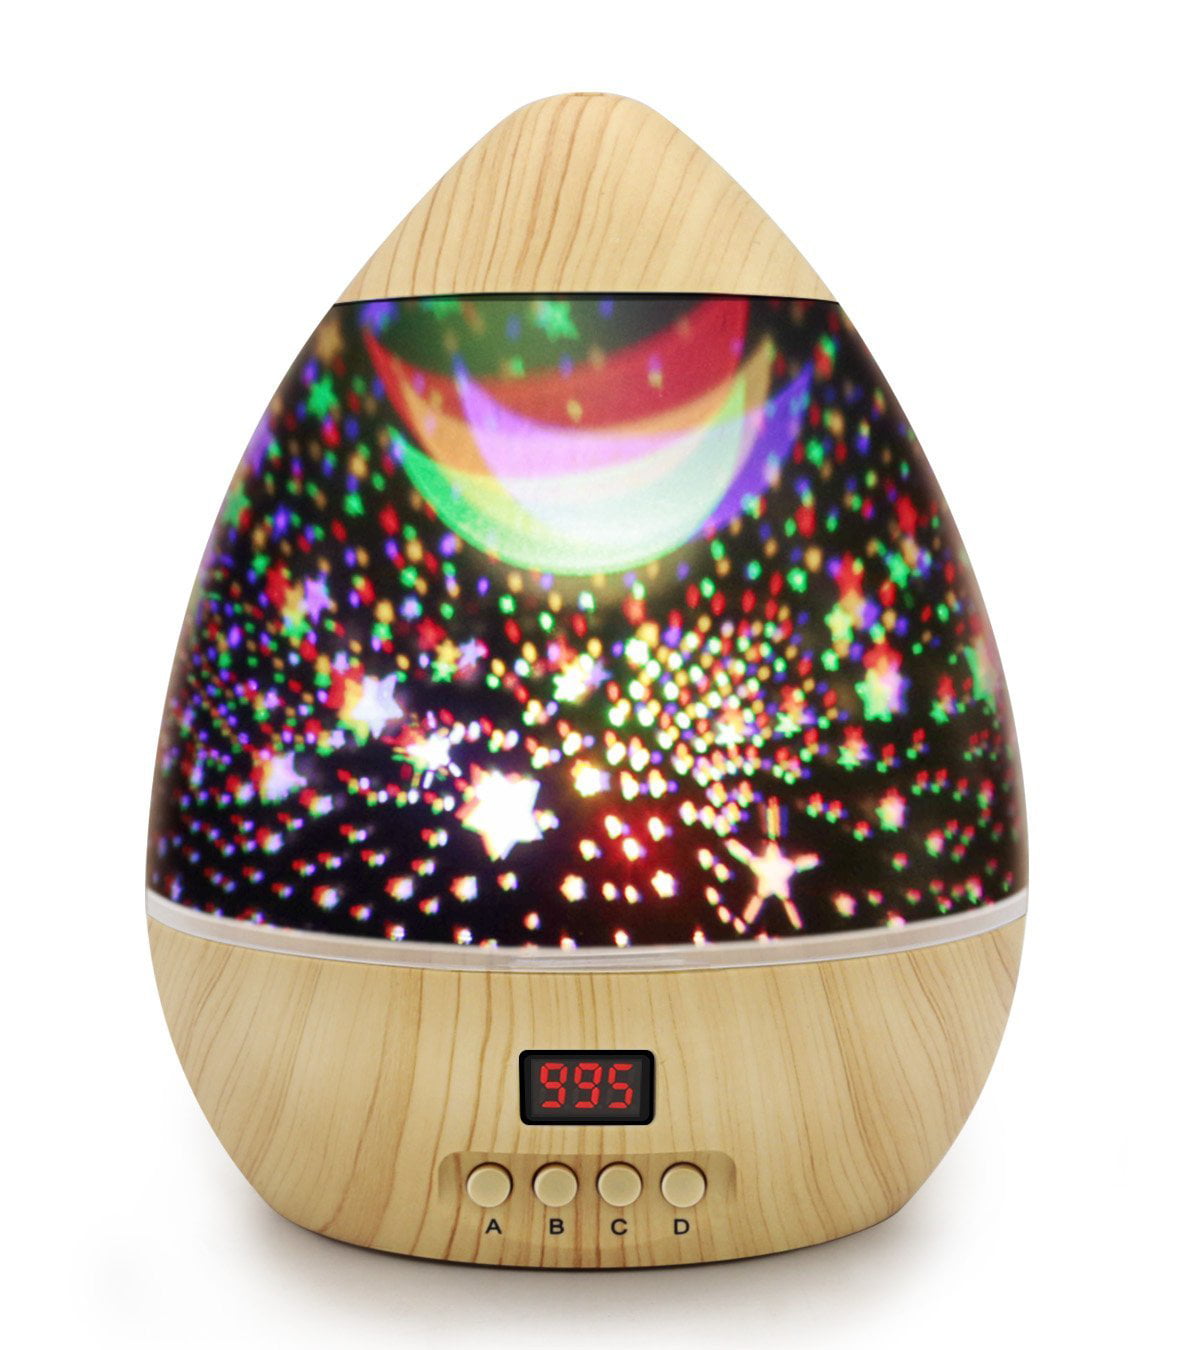 Star Projector Night Light, Wood Grain LED Bedroom Light Projector with